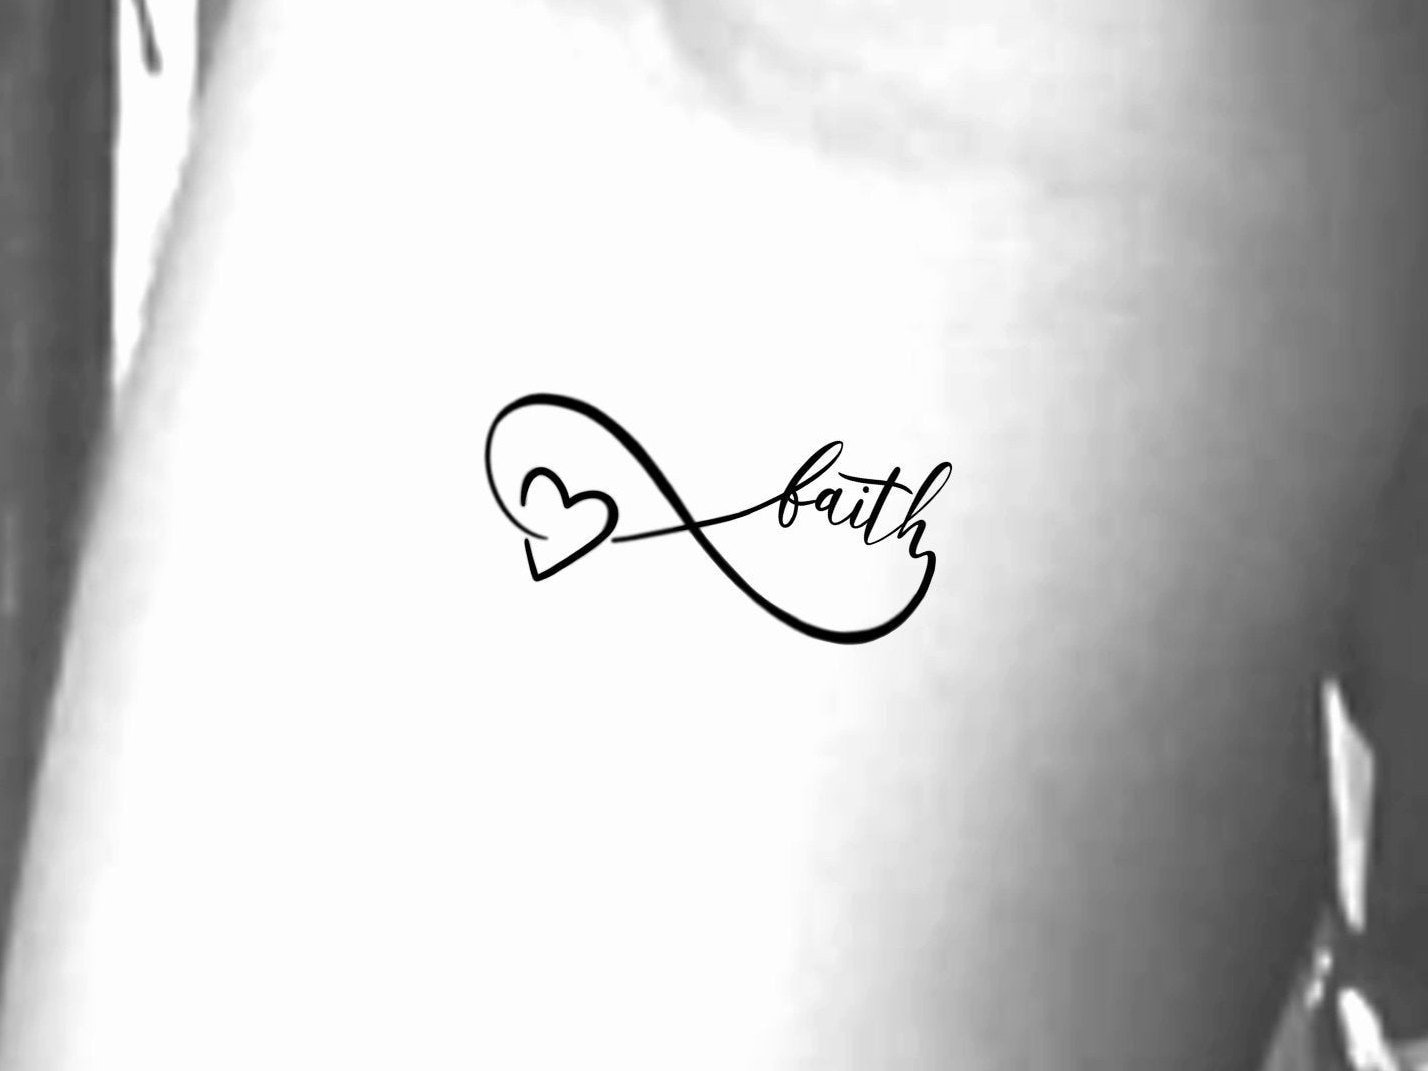 The Best Infinity Tattoos We've Ever Seen (13 Photos)